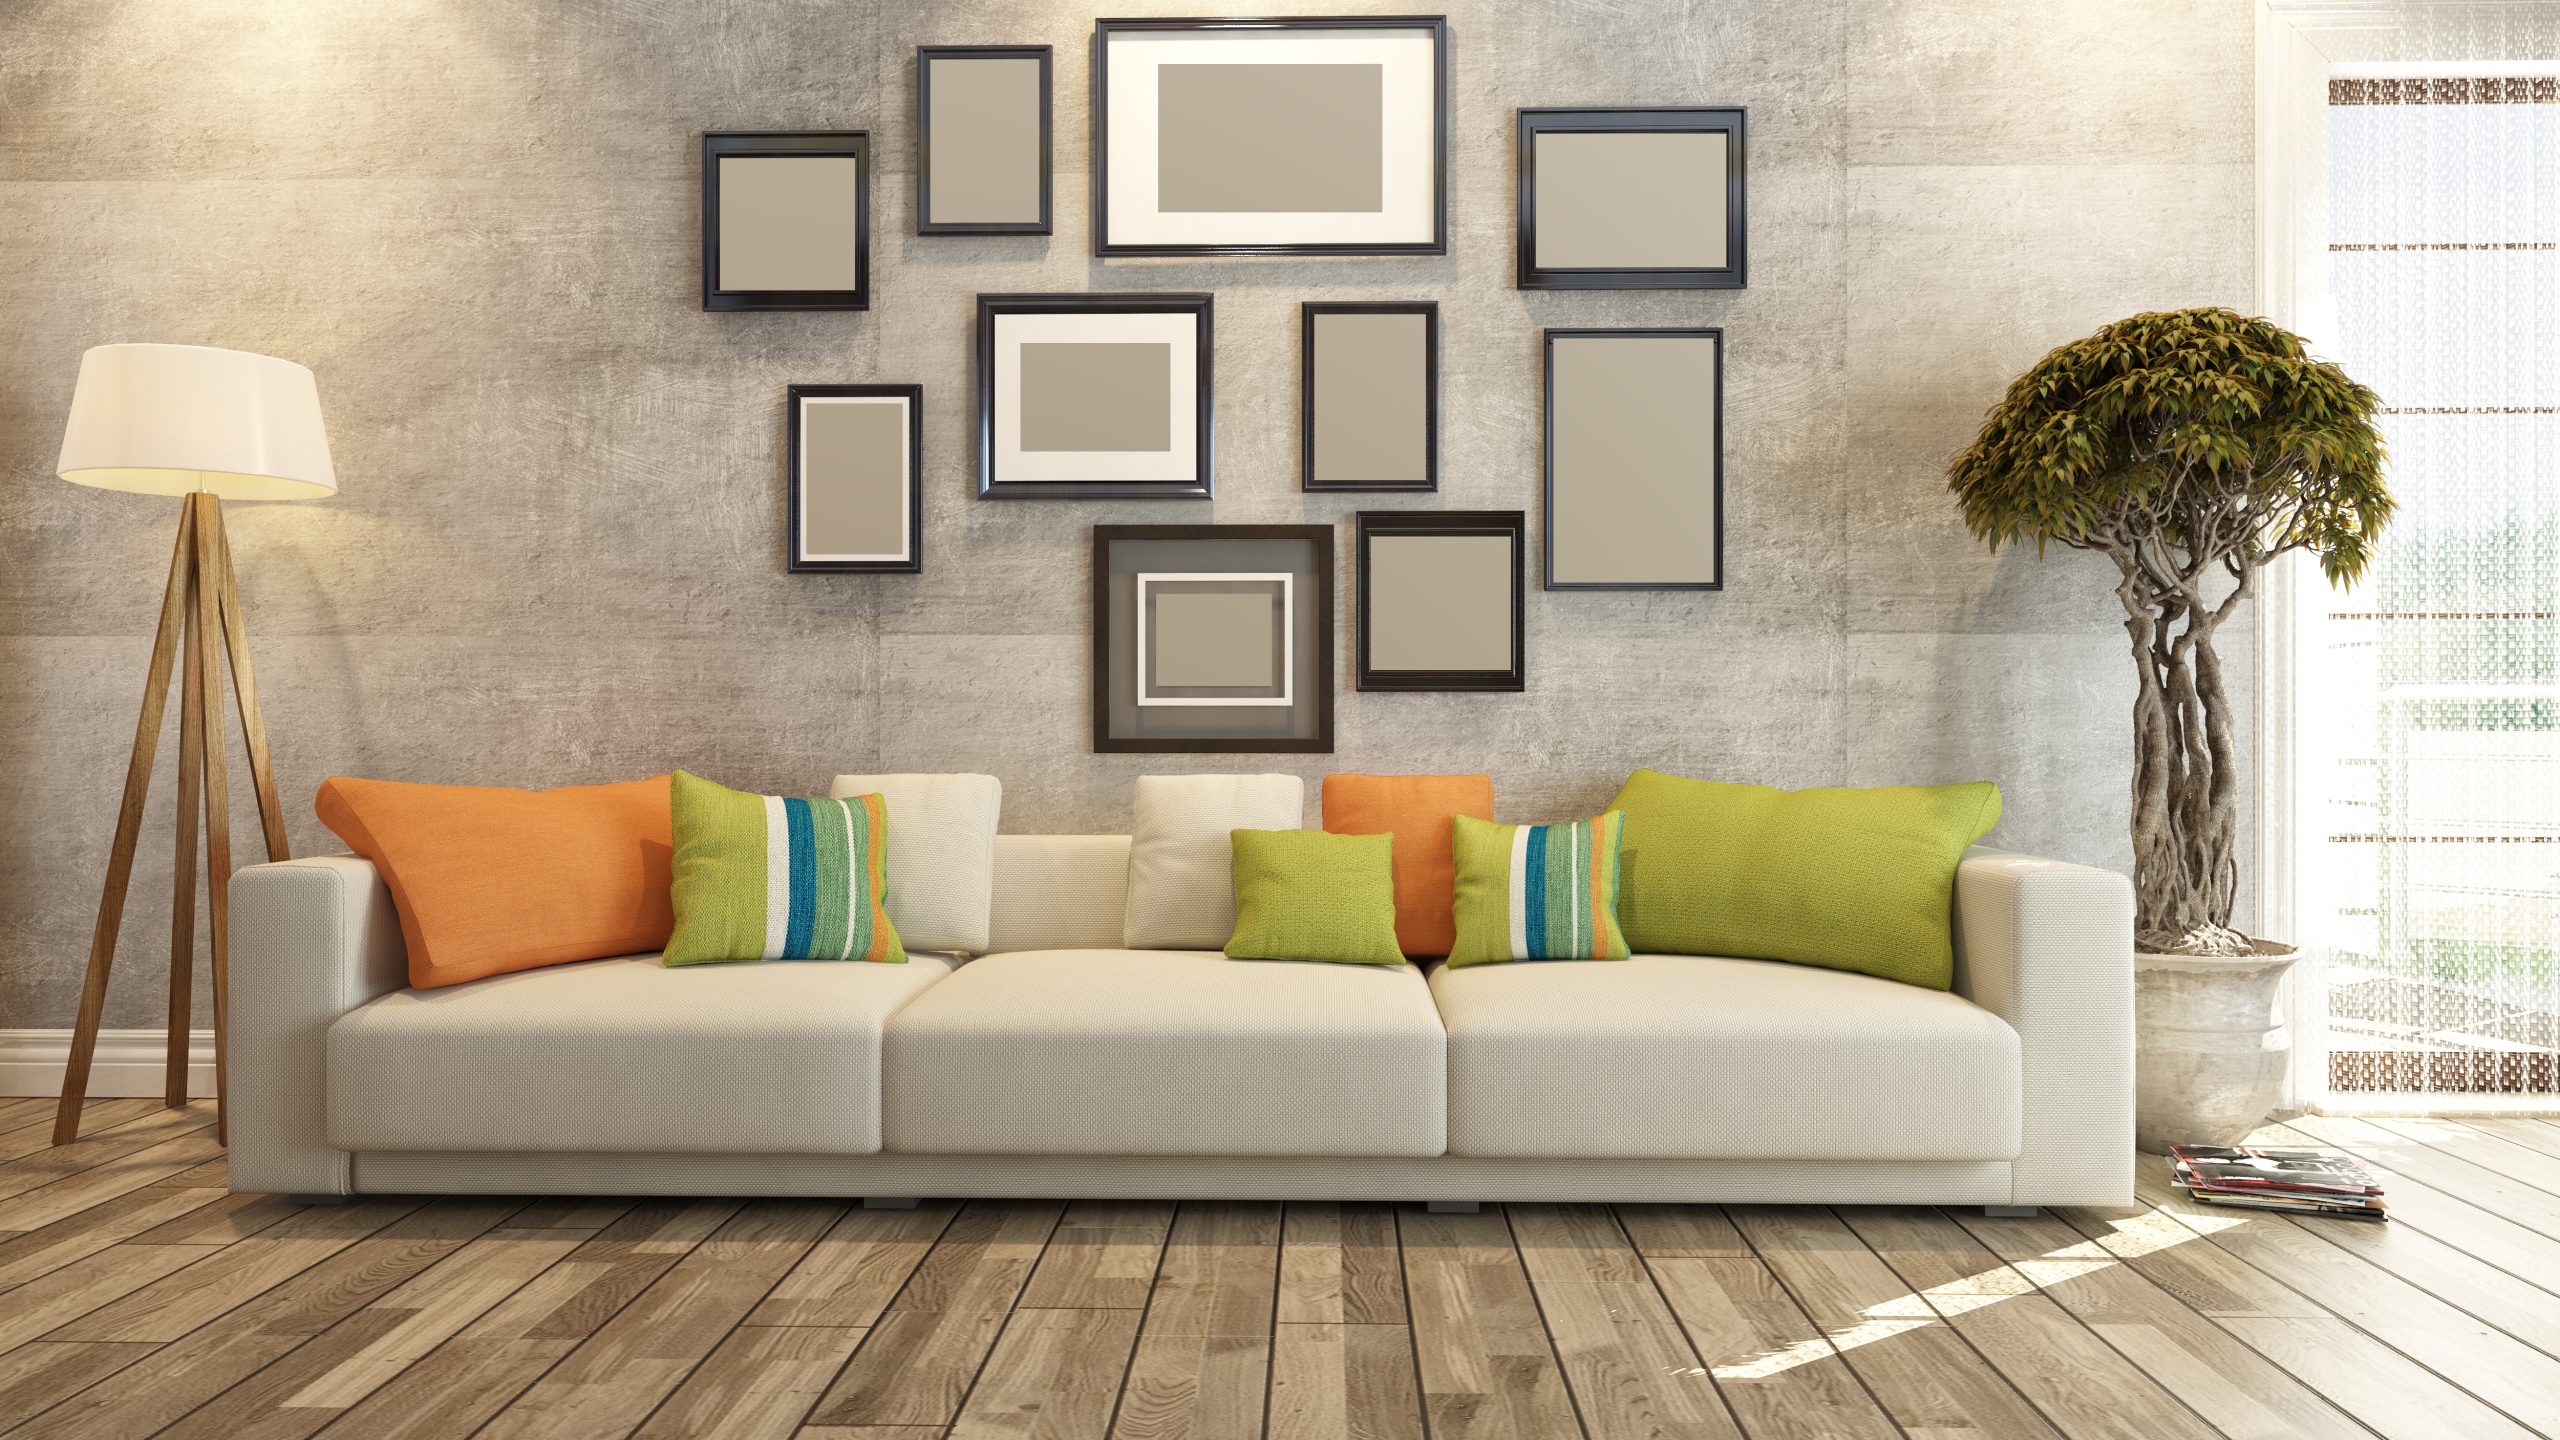 interior design with frames on concrete wall 3d rendering